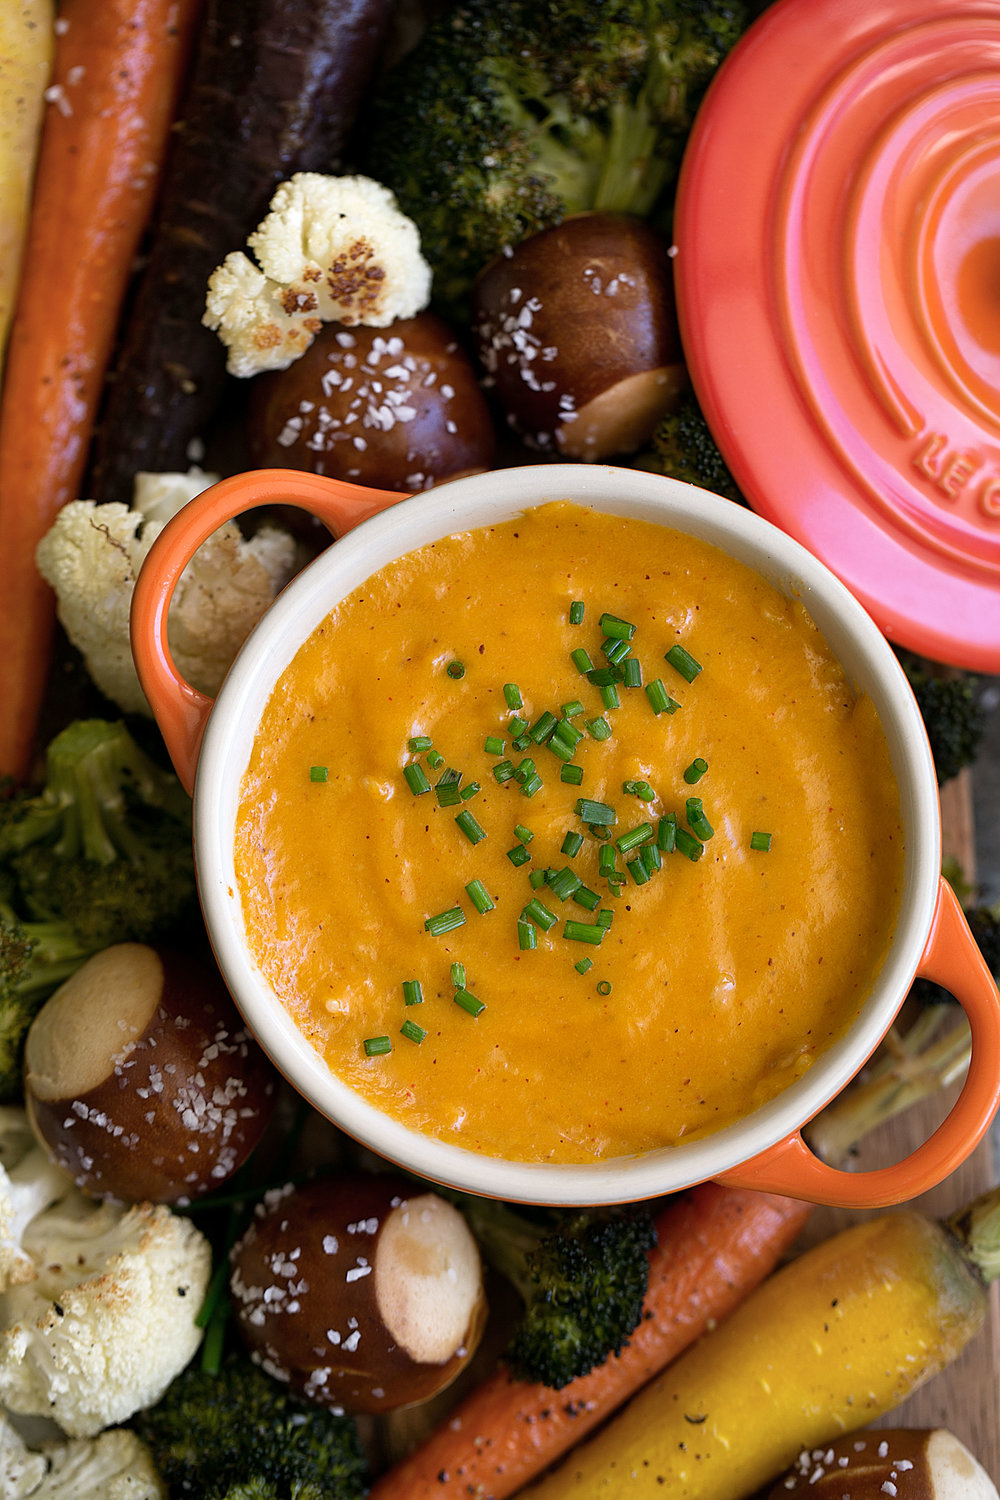 This beer cheese fondue recipe is made with Cheddar cheese and seasoned with pilsner beer and Worcestershire accompanied by roasted vegetables